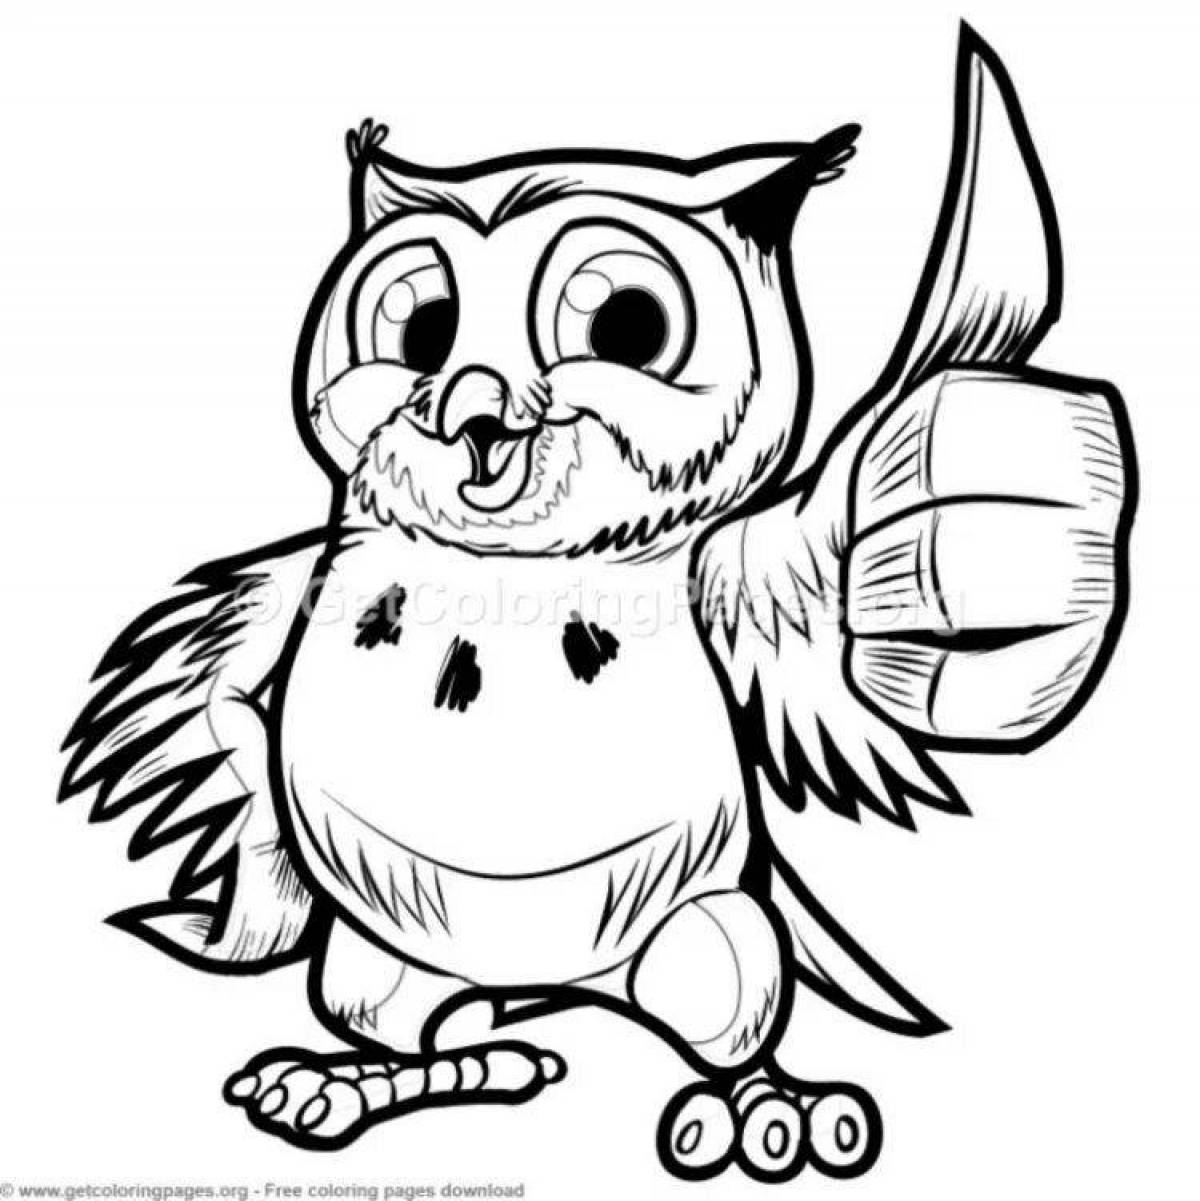 Coloring page wise owl with a wise look